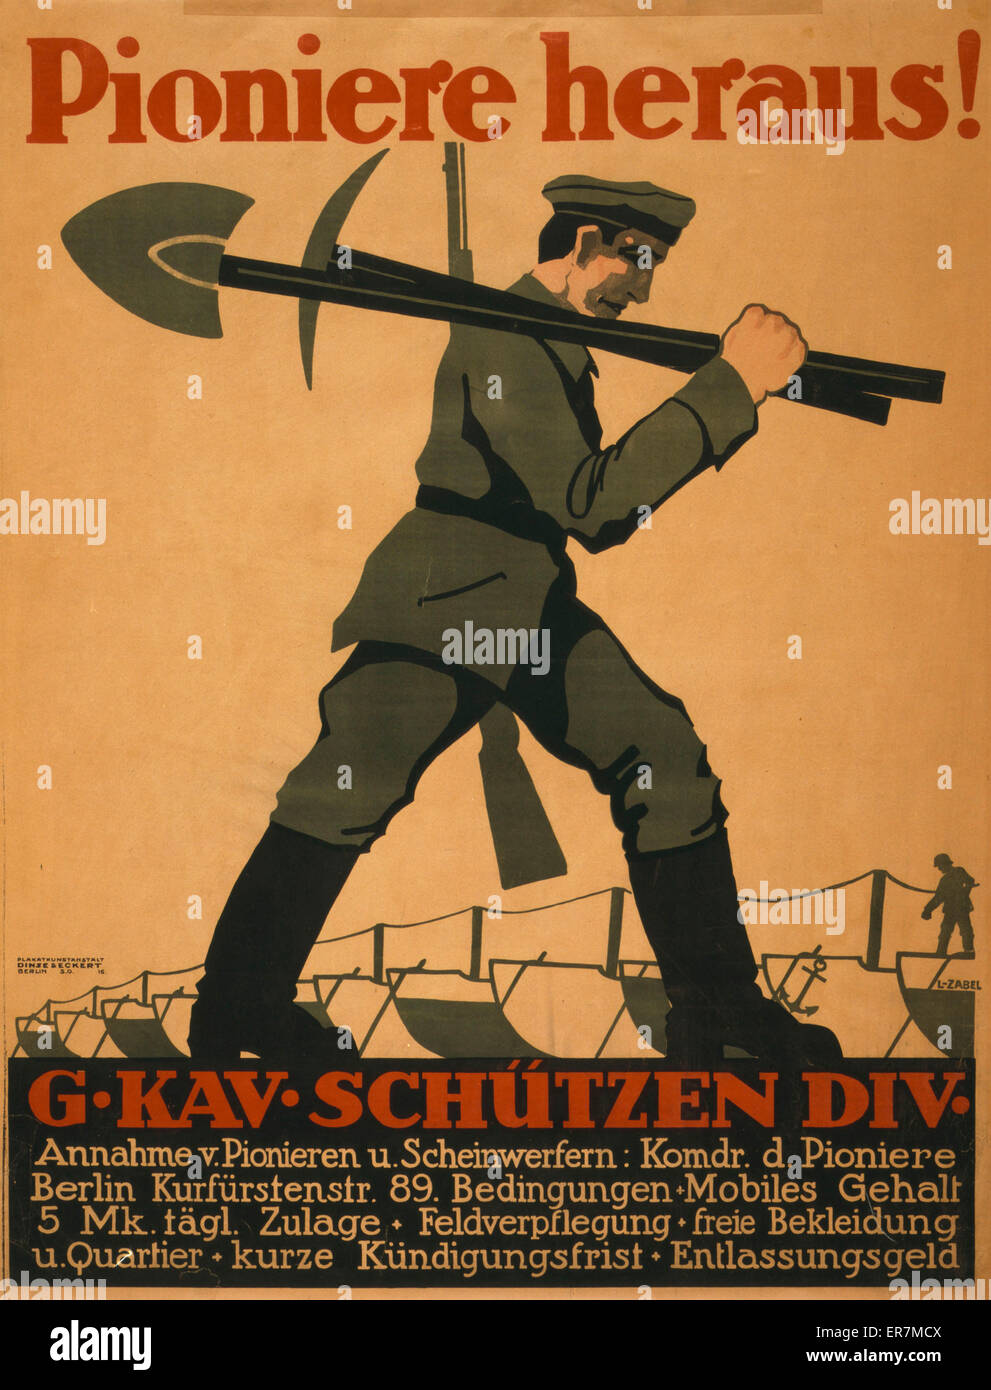 Pioniere heraus! G.Kav.Schutzen Div. Poster shows a soldier carrying a shovel, pickax and a rifle; in background a line of ships. Text is call for sappers to join the G. Cavalry Protection Division, Berlin. Benefits are listed. Date 1918. Pioniere heraus! Stock Photo